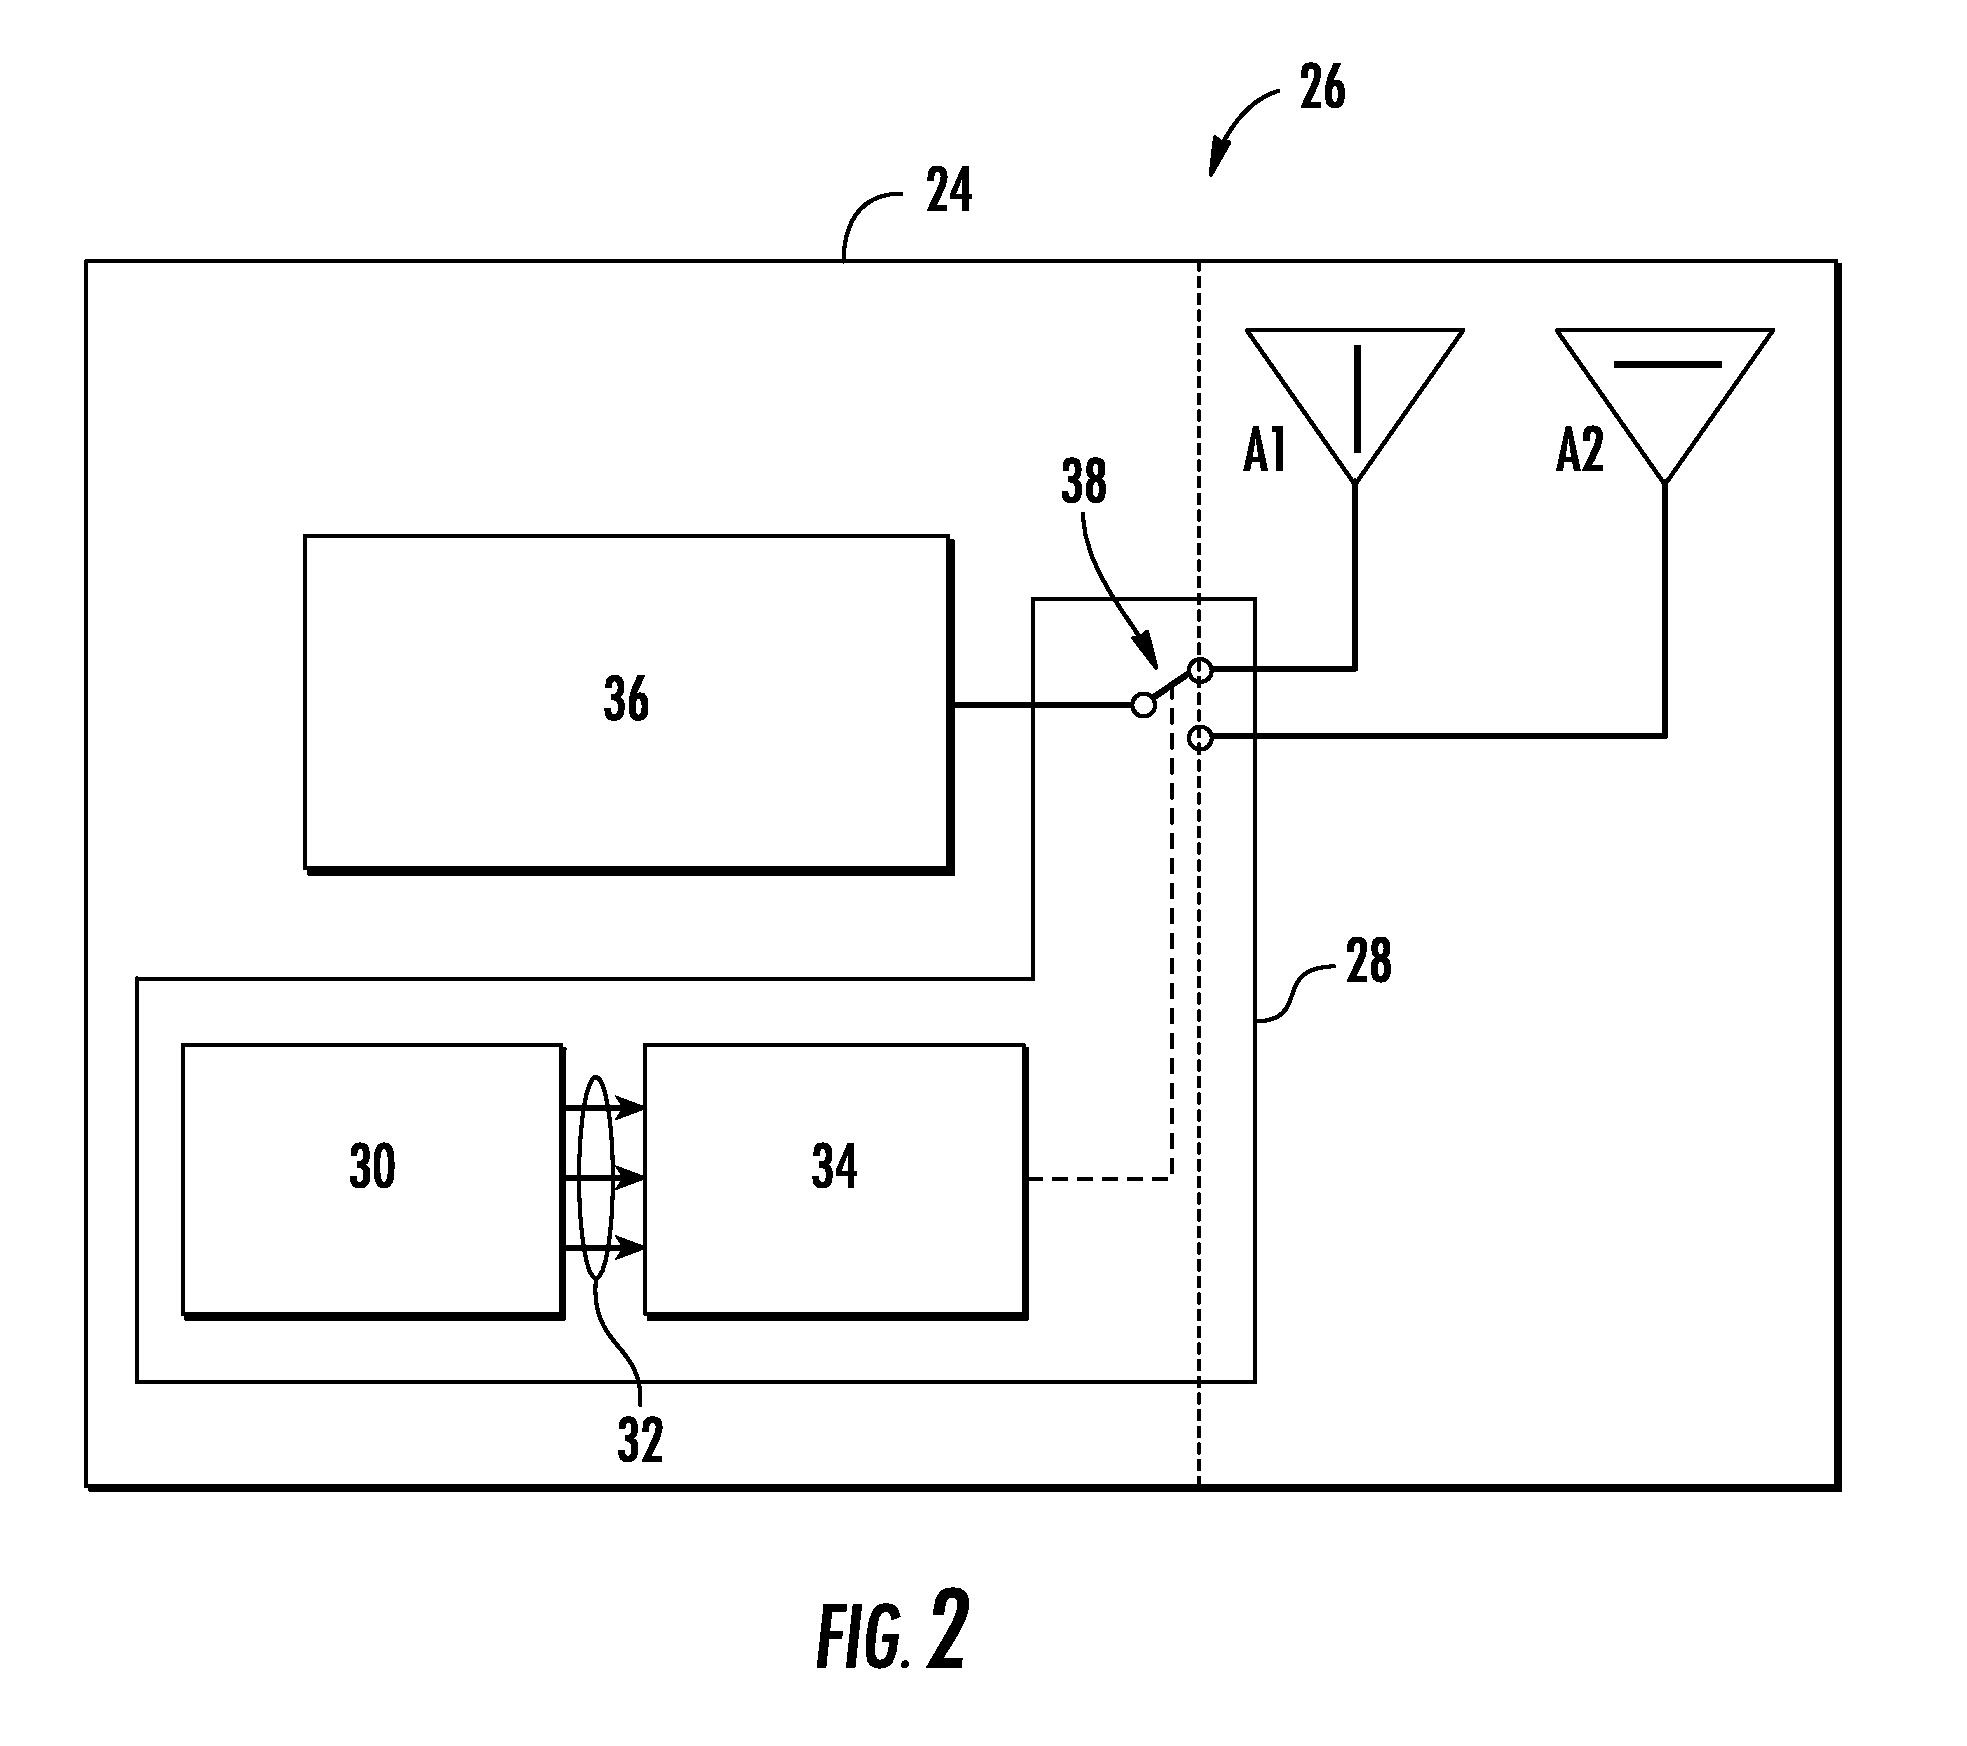 Antenna selection based on orientation, and related apparatuses, antenna units, methods, and distributed antenna systems